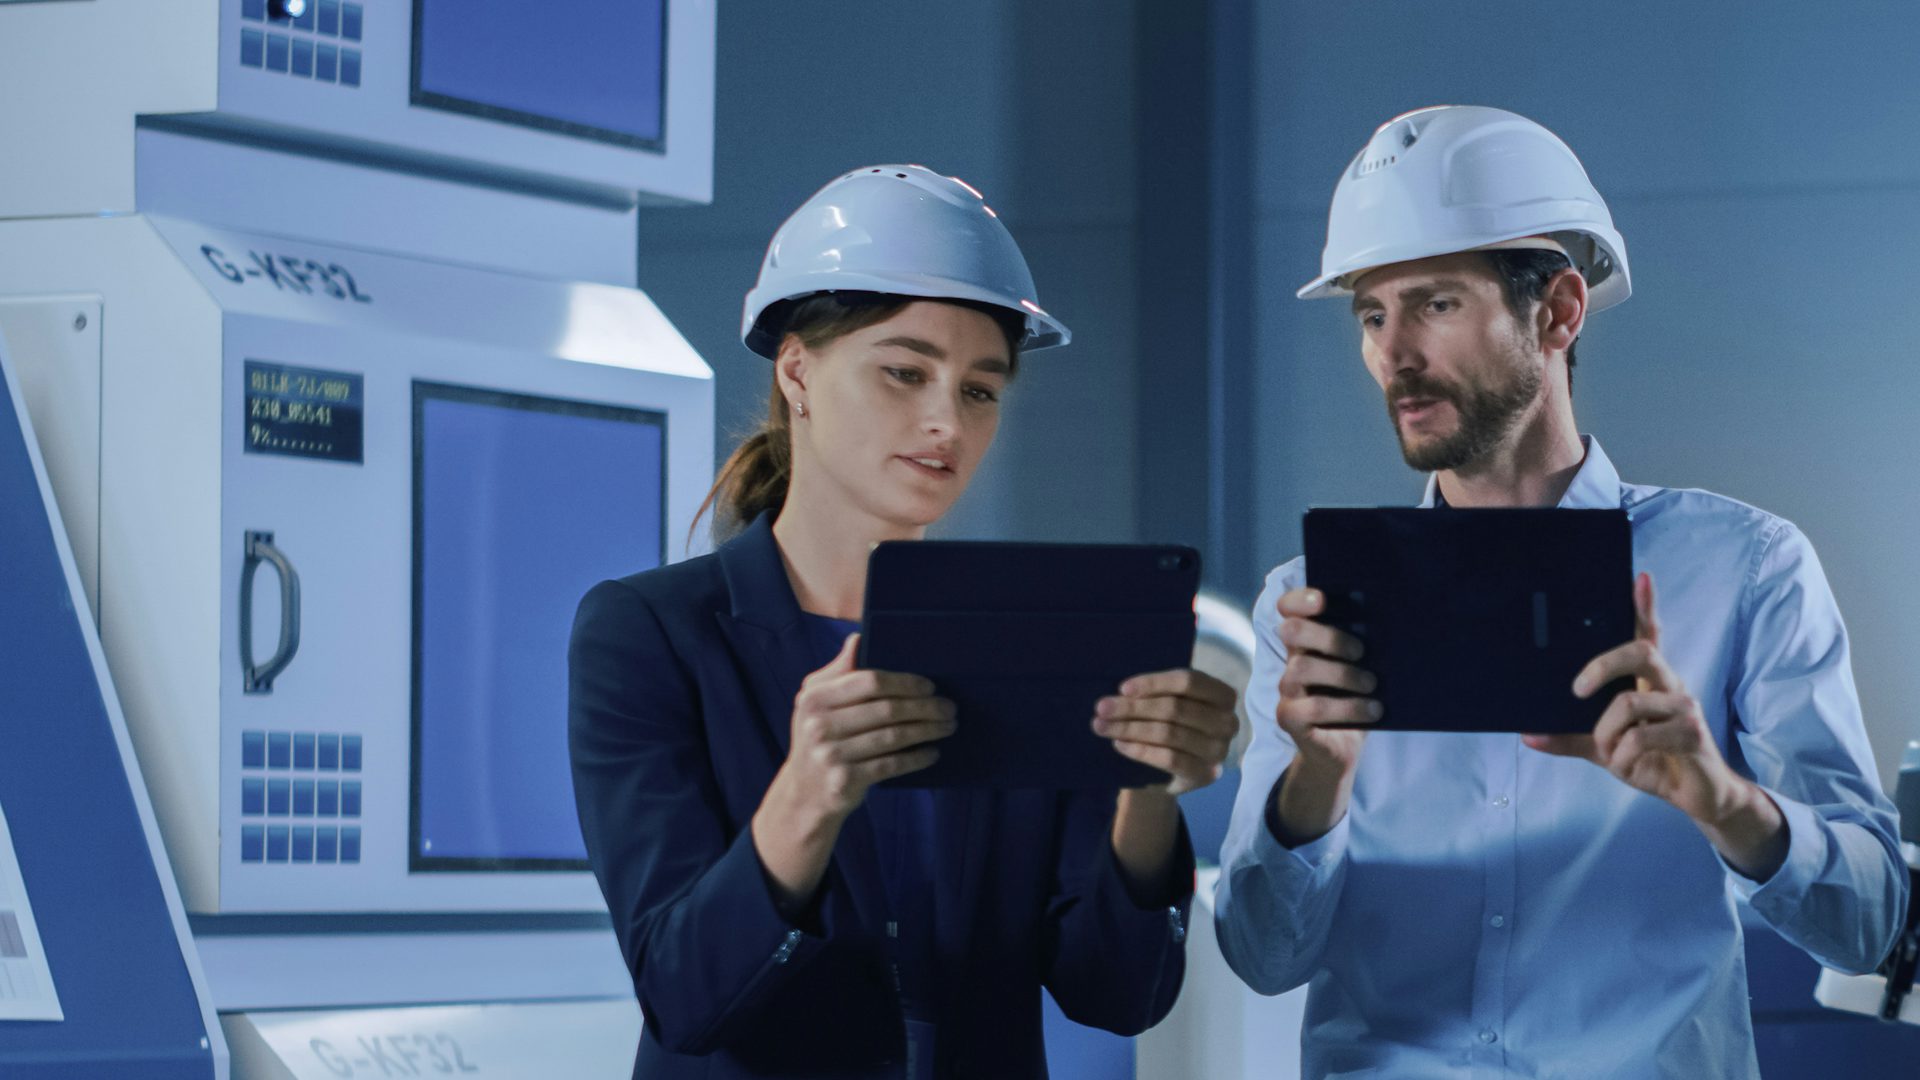 A man and a woman in hard hats, each holding a tablet, on a factory floor